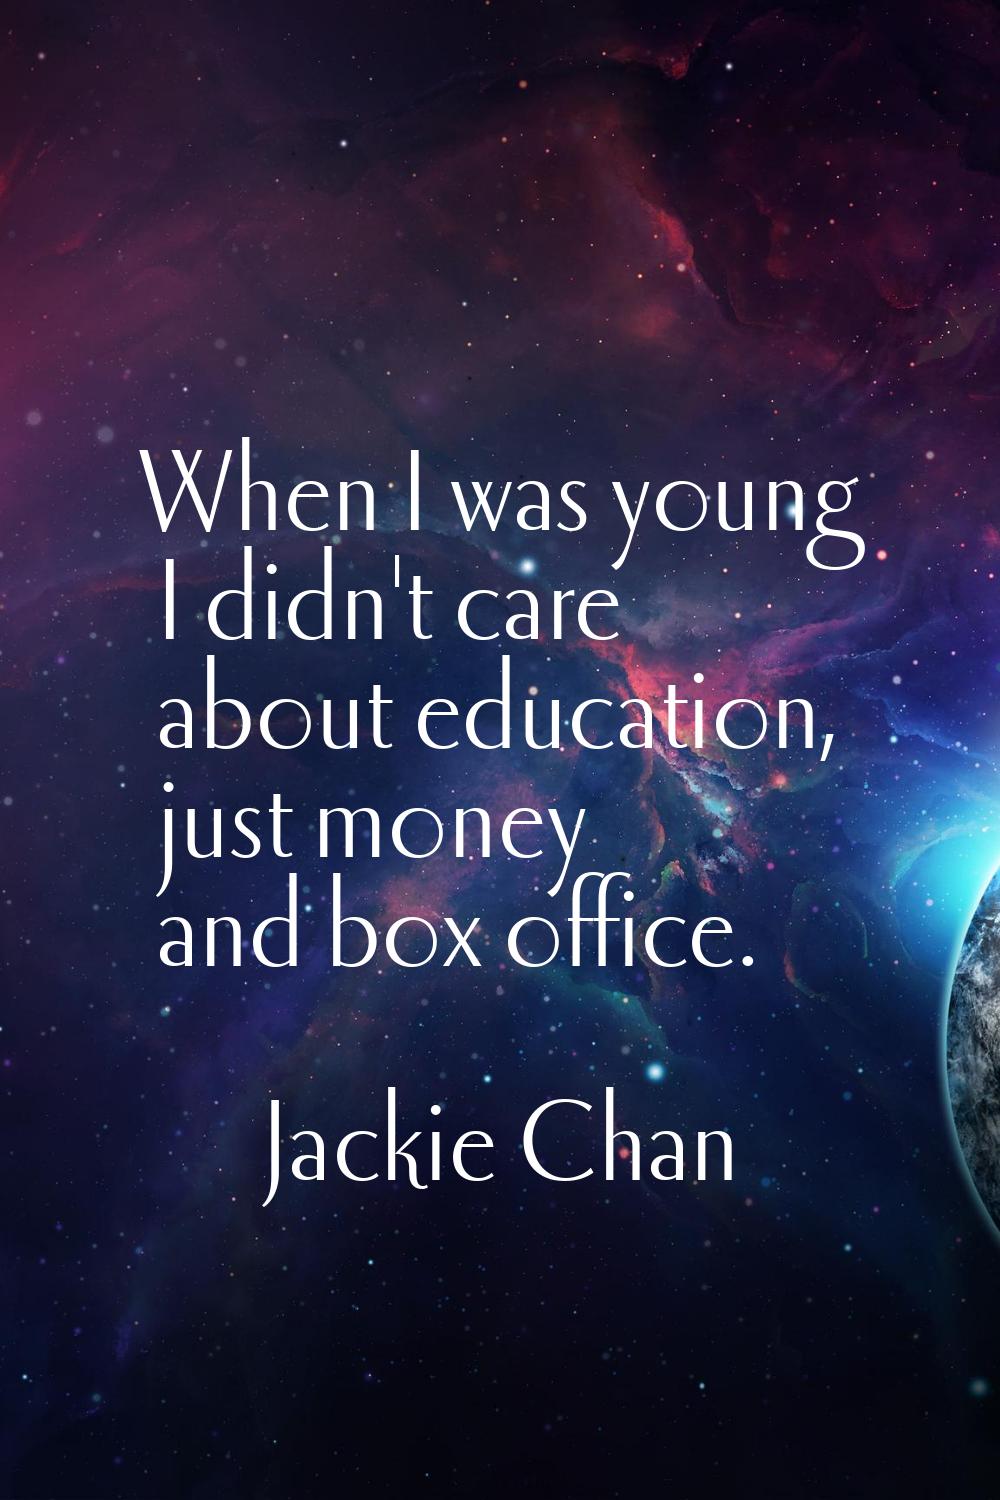 When I was young I didn't care about education, just money and box office.